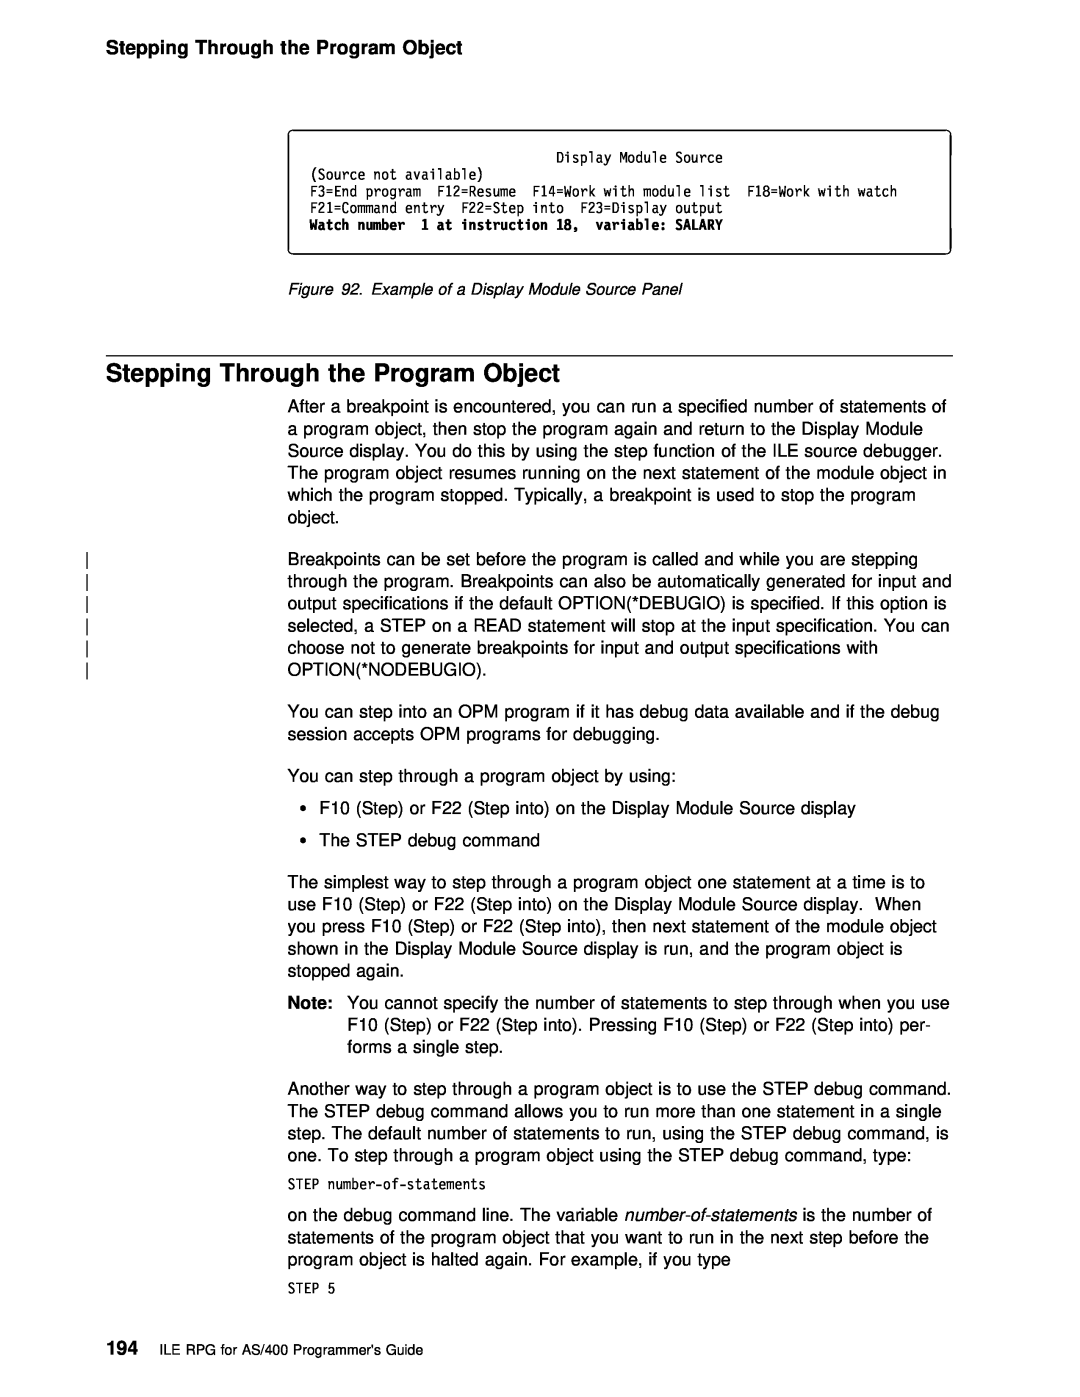 IBM AS/400 manual Stepping Through the Program Object 